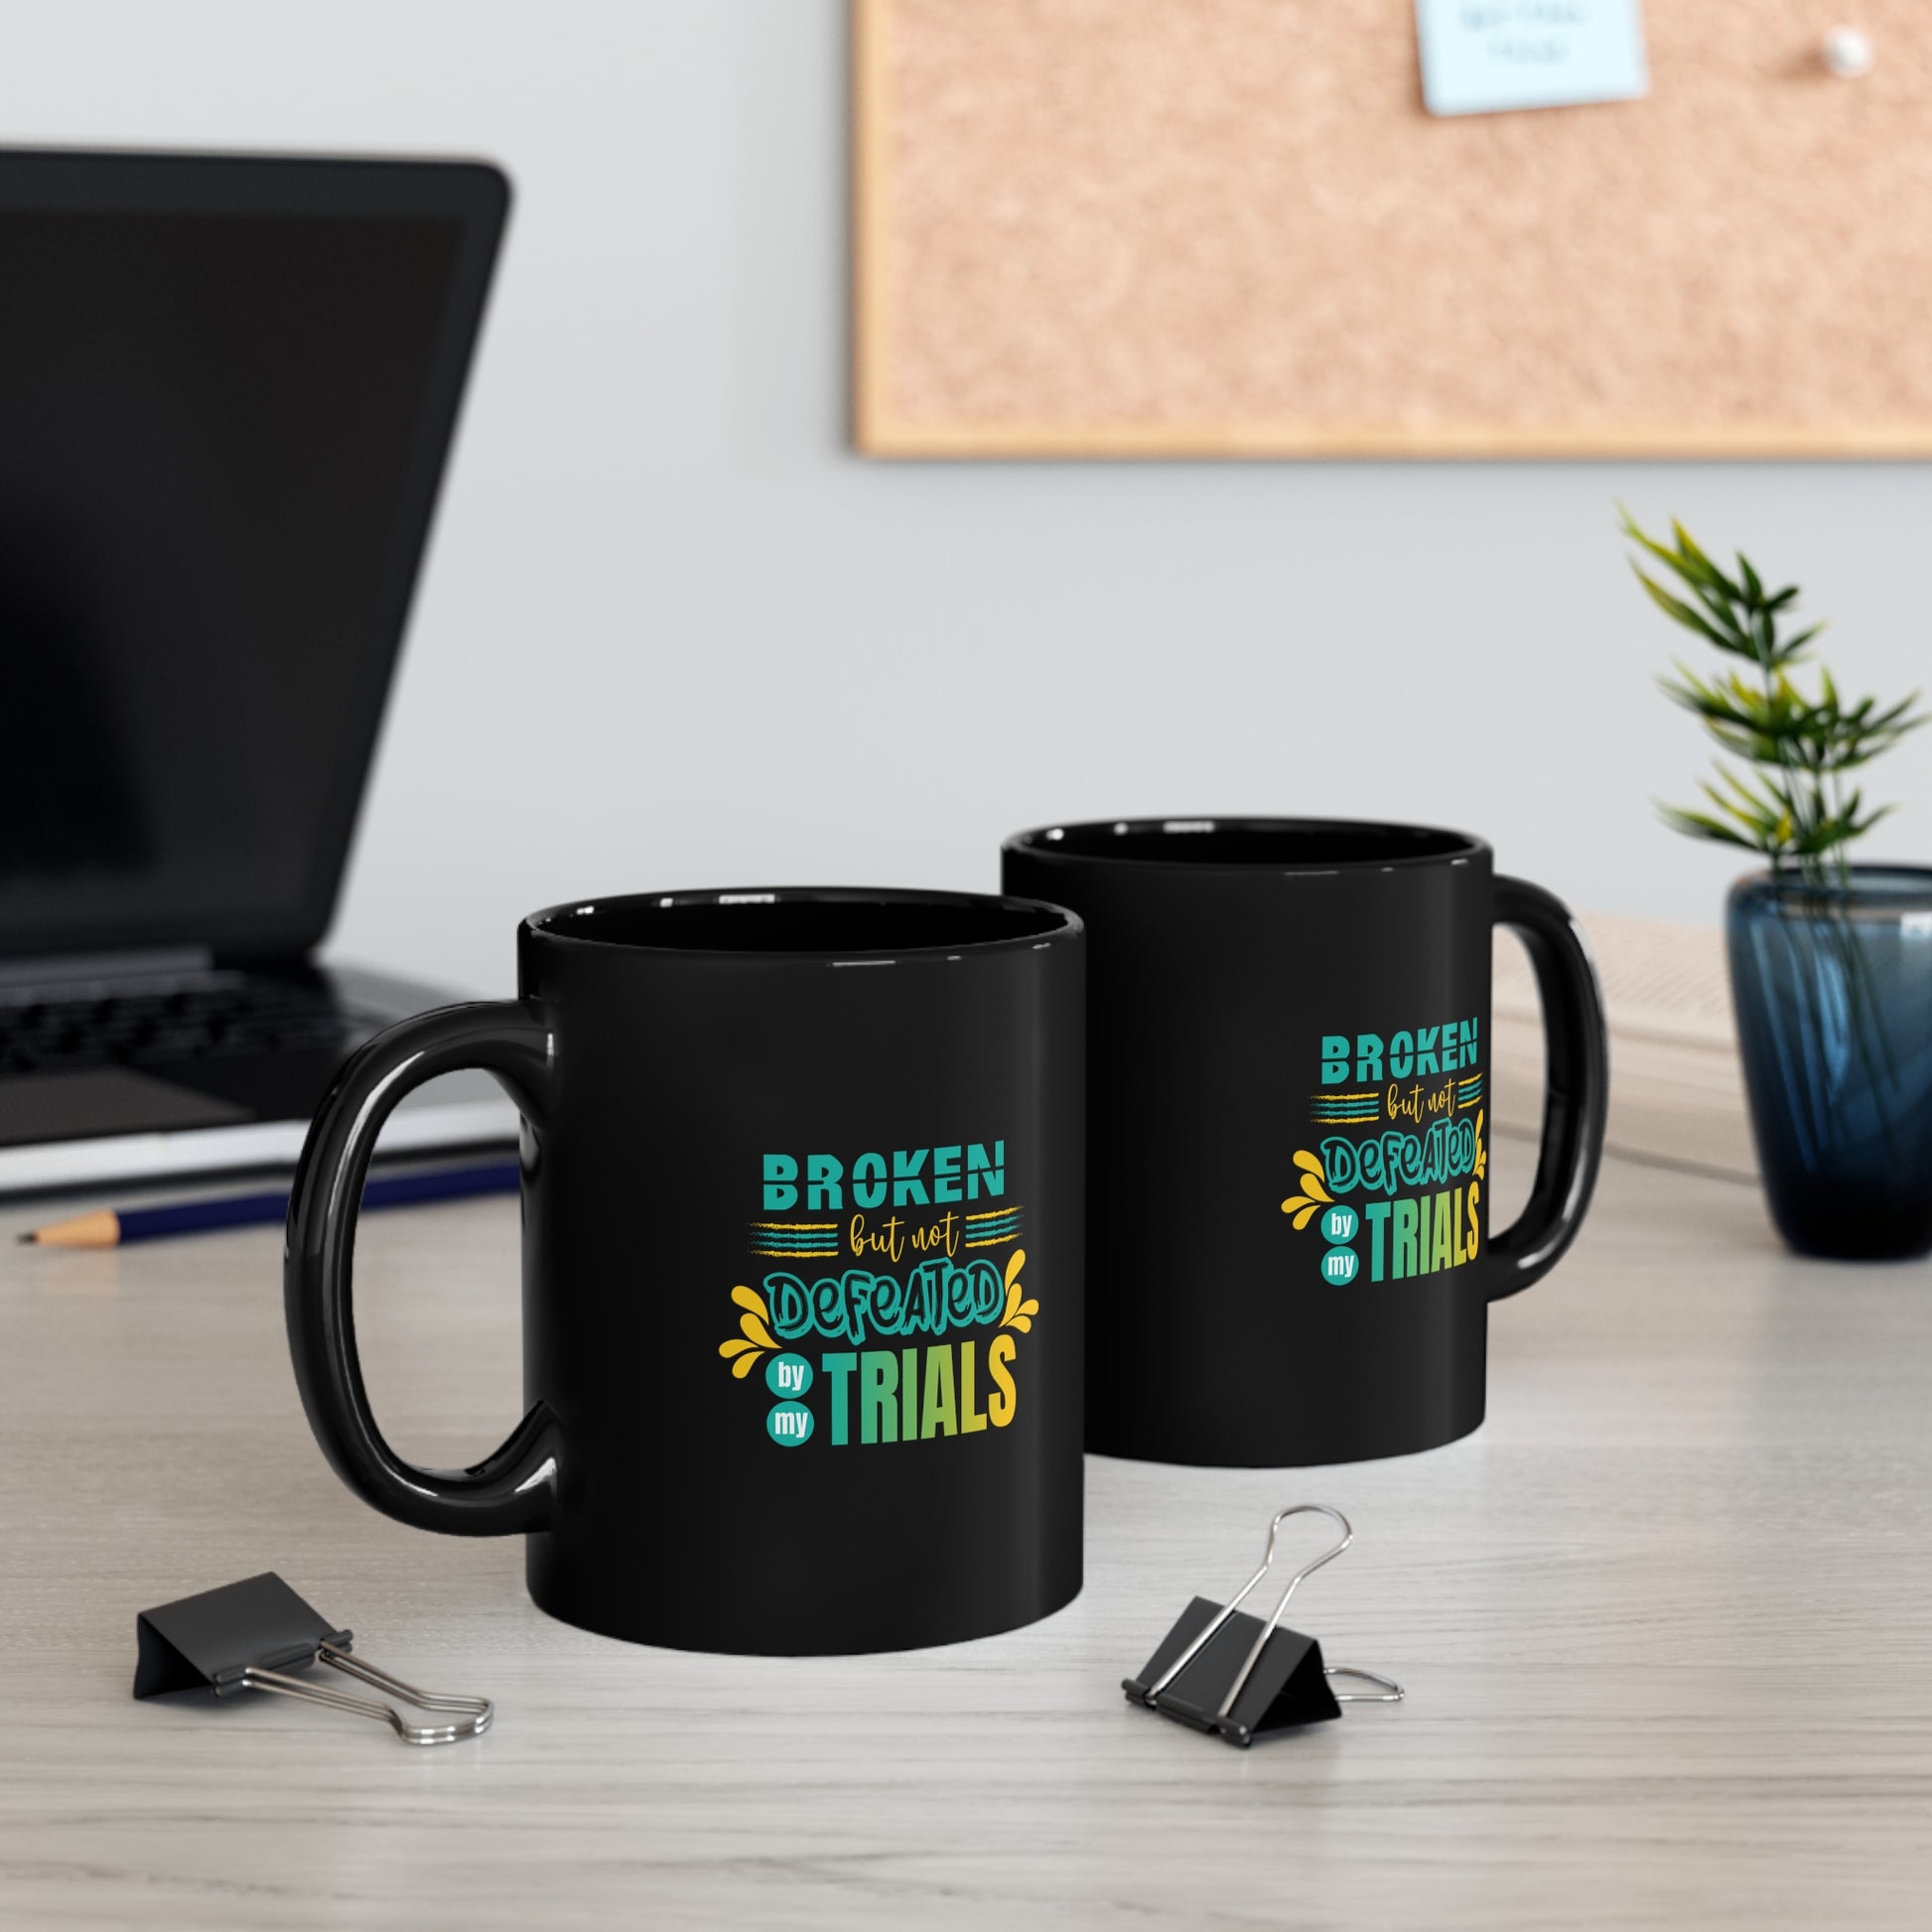 Broken But Not Defeated By My Trials Christian Black Ceramic Mug 11oz (double sided print) Printify